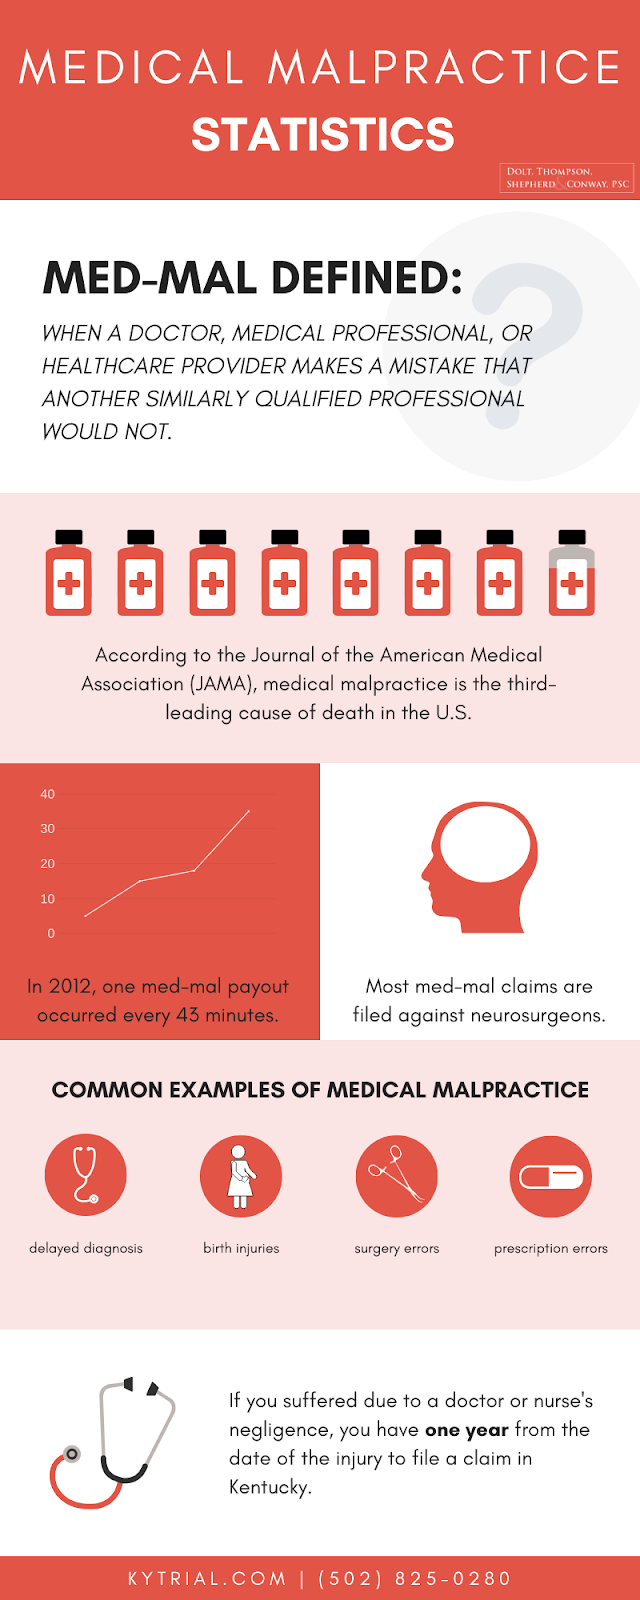 Medical Malpractice Statistics Infographic. Med-Mal defined: when a doctor, medical professional, or healthcare provider makes a mistake that another similarly qualified professional would not. According to the Journal of American Medical Association, medical malpractice is the third-leading cause of death in the U.S. In 2012, one med-mal payout occurred every 43 minutes. Most med-mal claims are filed against neurosurgeons. Common examples of medical malpractice include delayed diagnosis, birth injuries, surgery errors, prescription errors. If you suffered due to a doctor or nurse's negligence, you have one year from the date of the injury to file a claim in Kentucky.